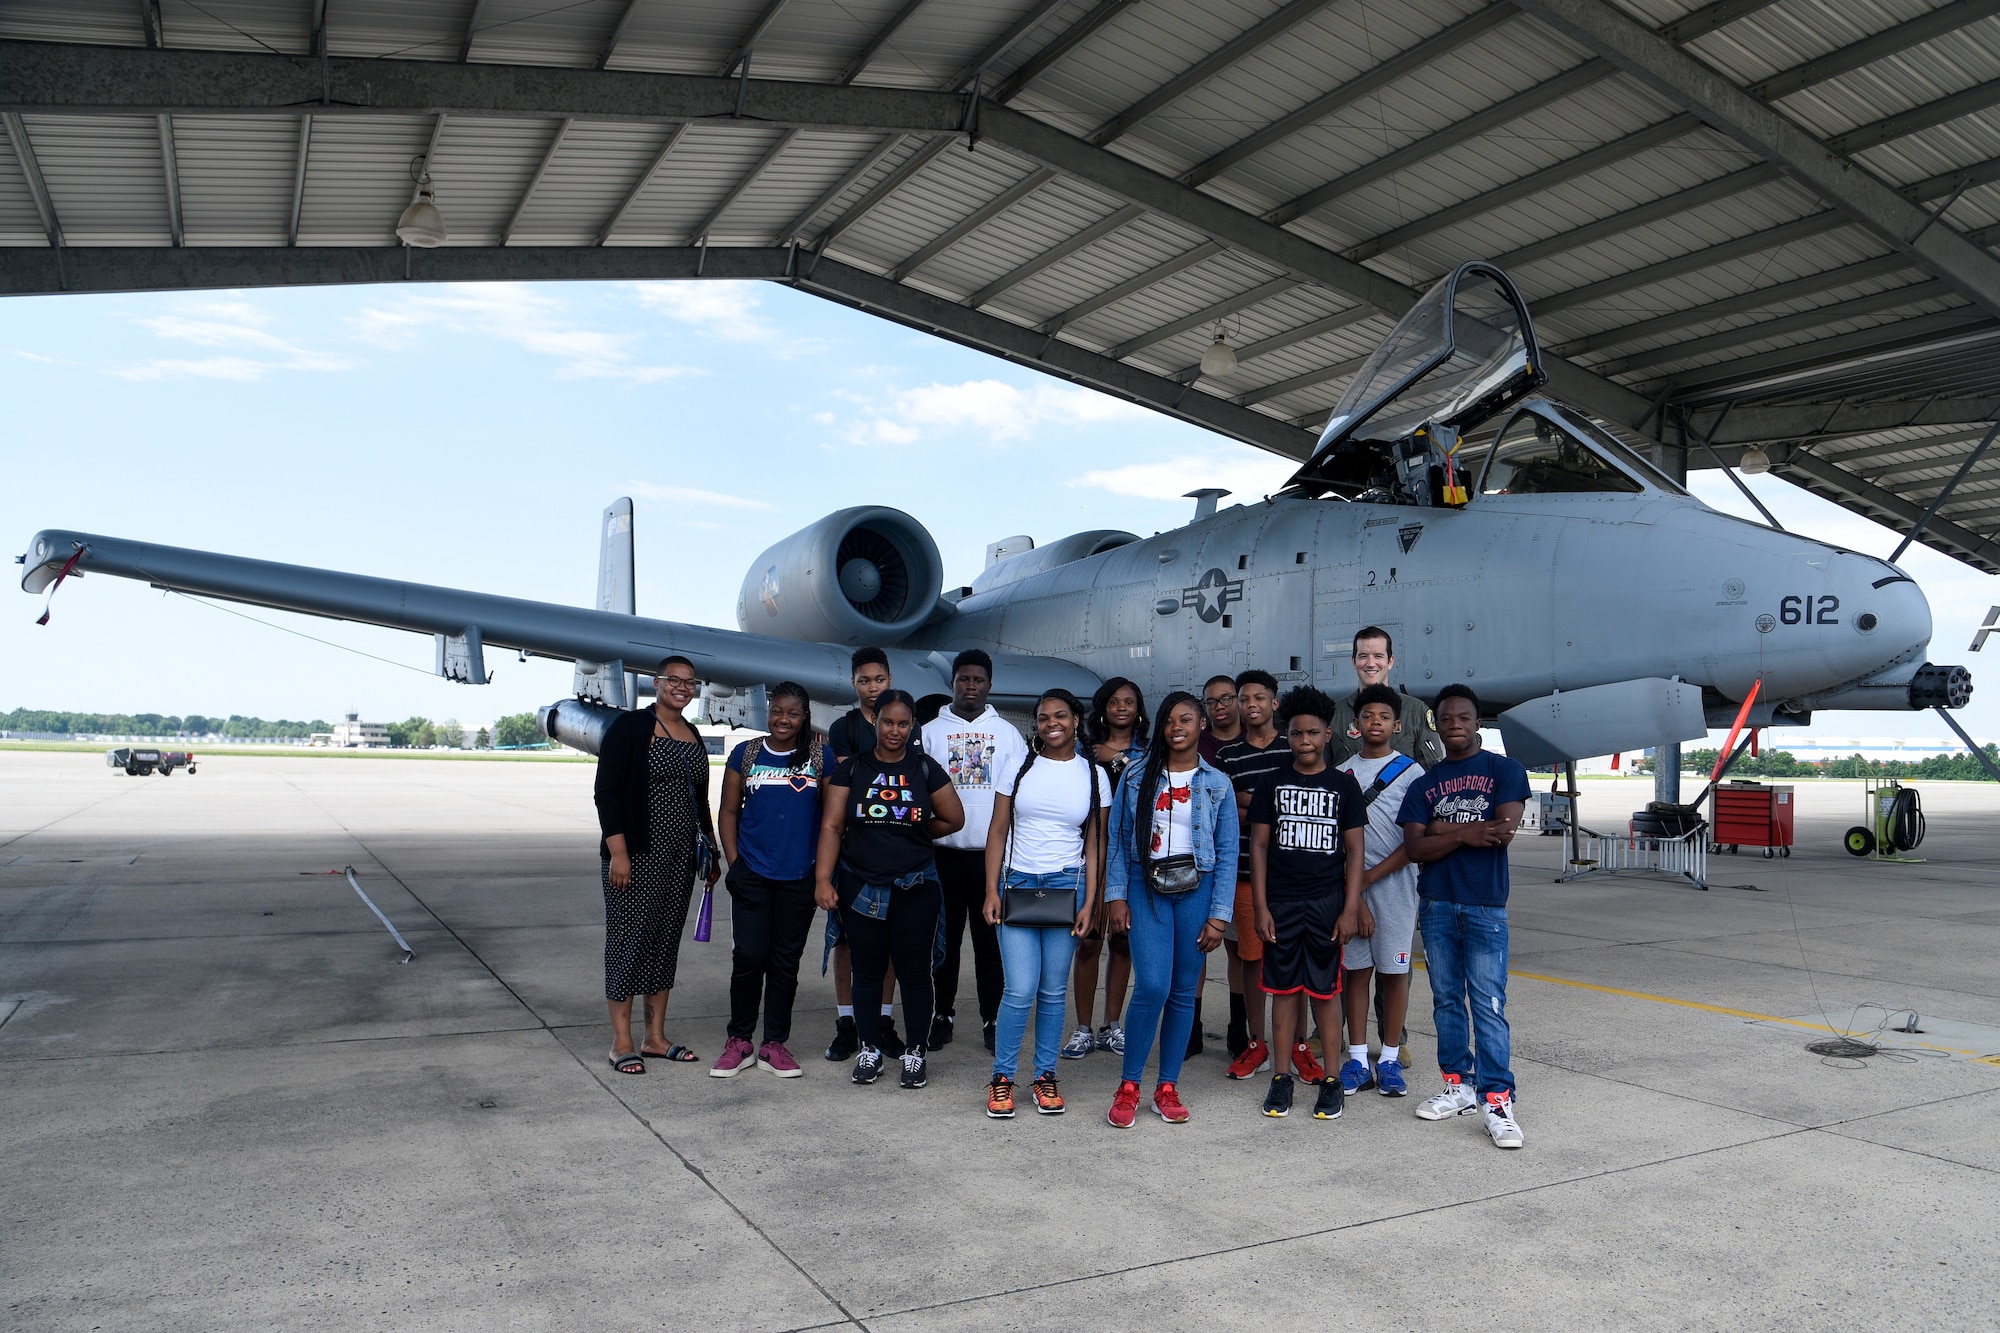 Students from the Baltimore City Department of Recreation and Parks Science, Technology, Engineering and Math program pose for a group photo, July 3, 2019, at Martin State Airport, Middle River, Md. The students, ranging from 9th – 12th grade, were introduced to the A-10C Thunderbolt II aircraft and simulator as well as Electro-Optical and Infrared (EOIR) sensors. (U.S. Air National Guard photo by Staff Sgt. Enjoli Saunders)